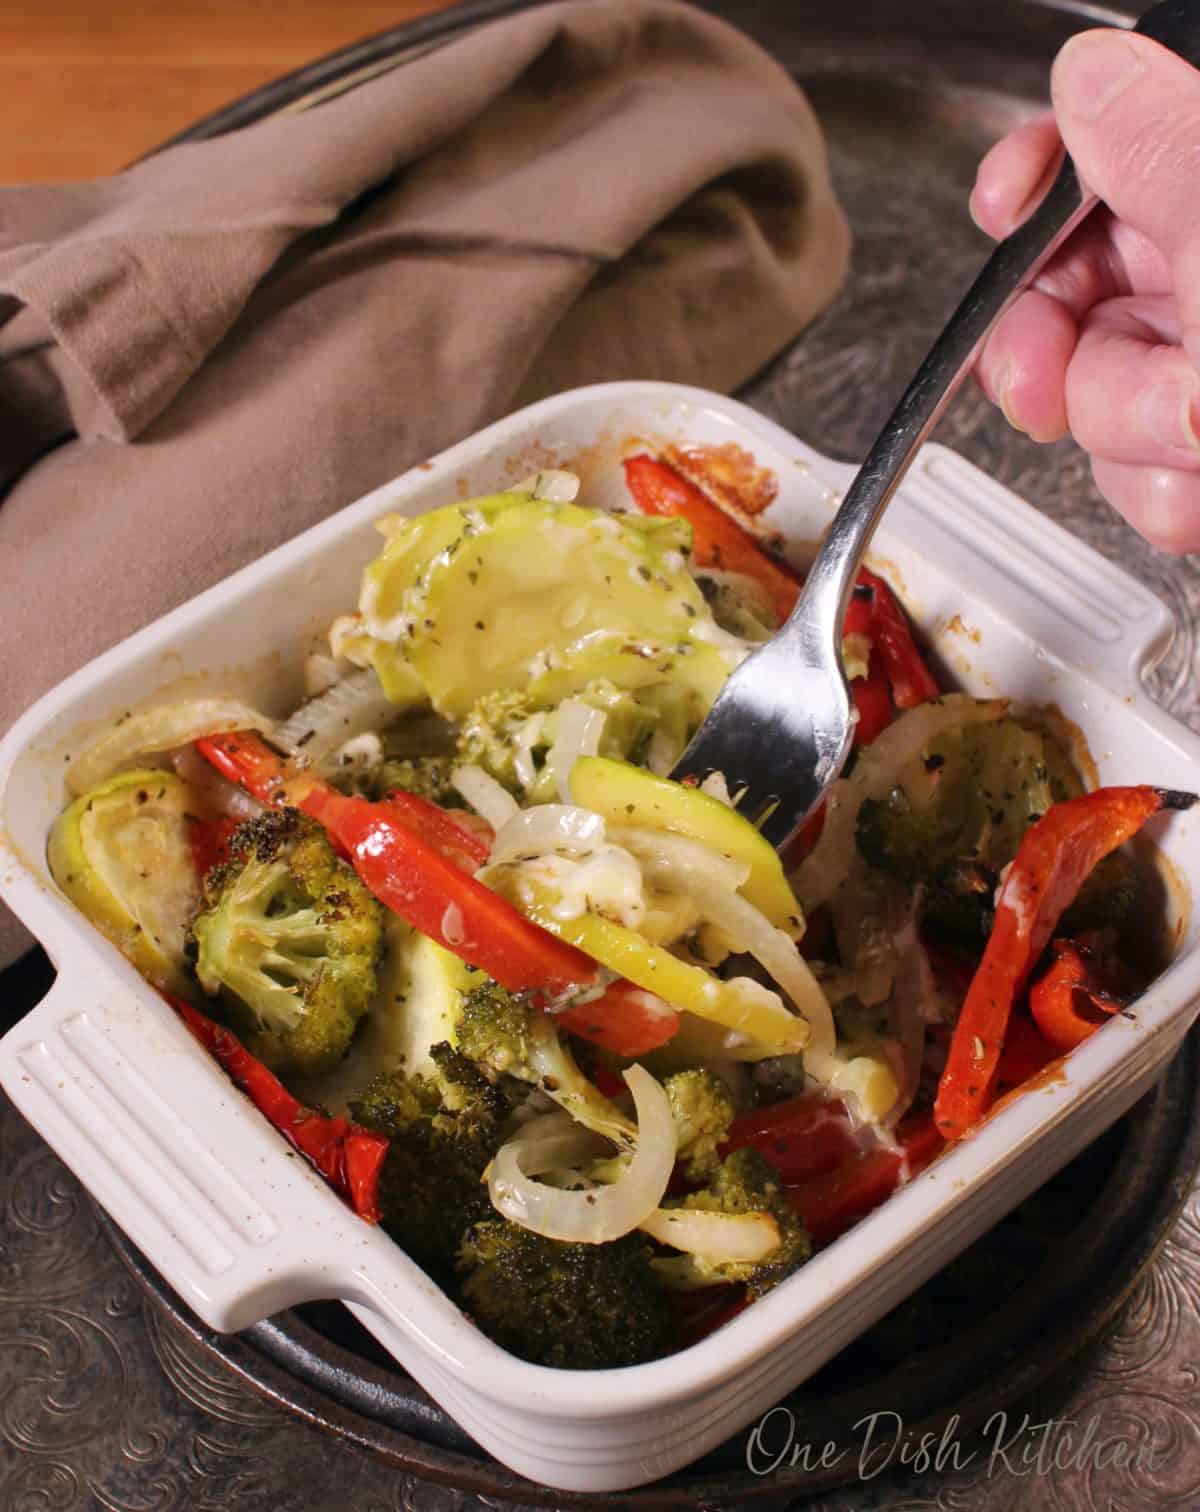 a forkful of vegetables being eaten out of a white casserole dish.